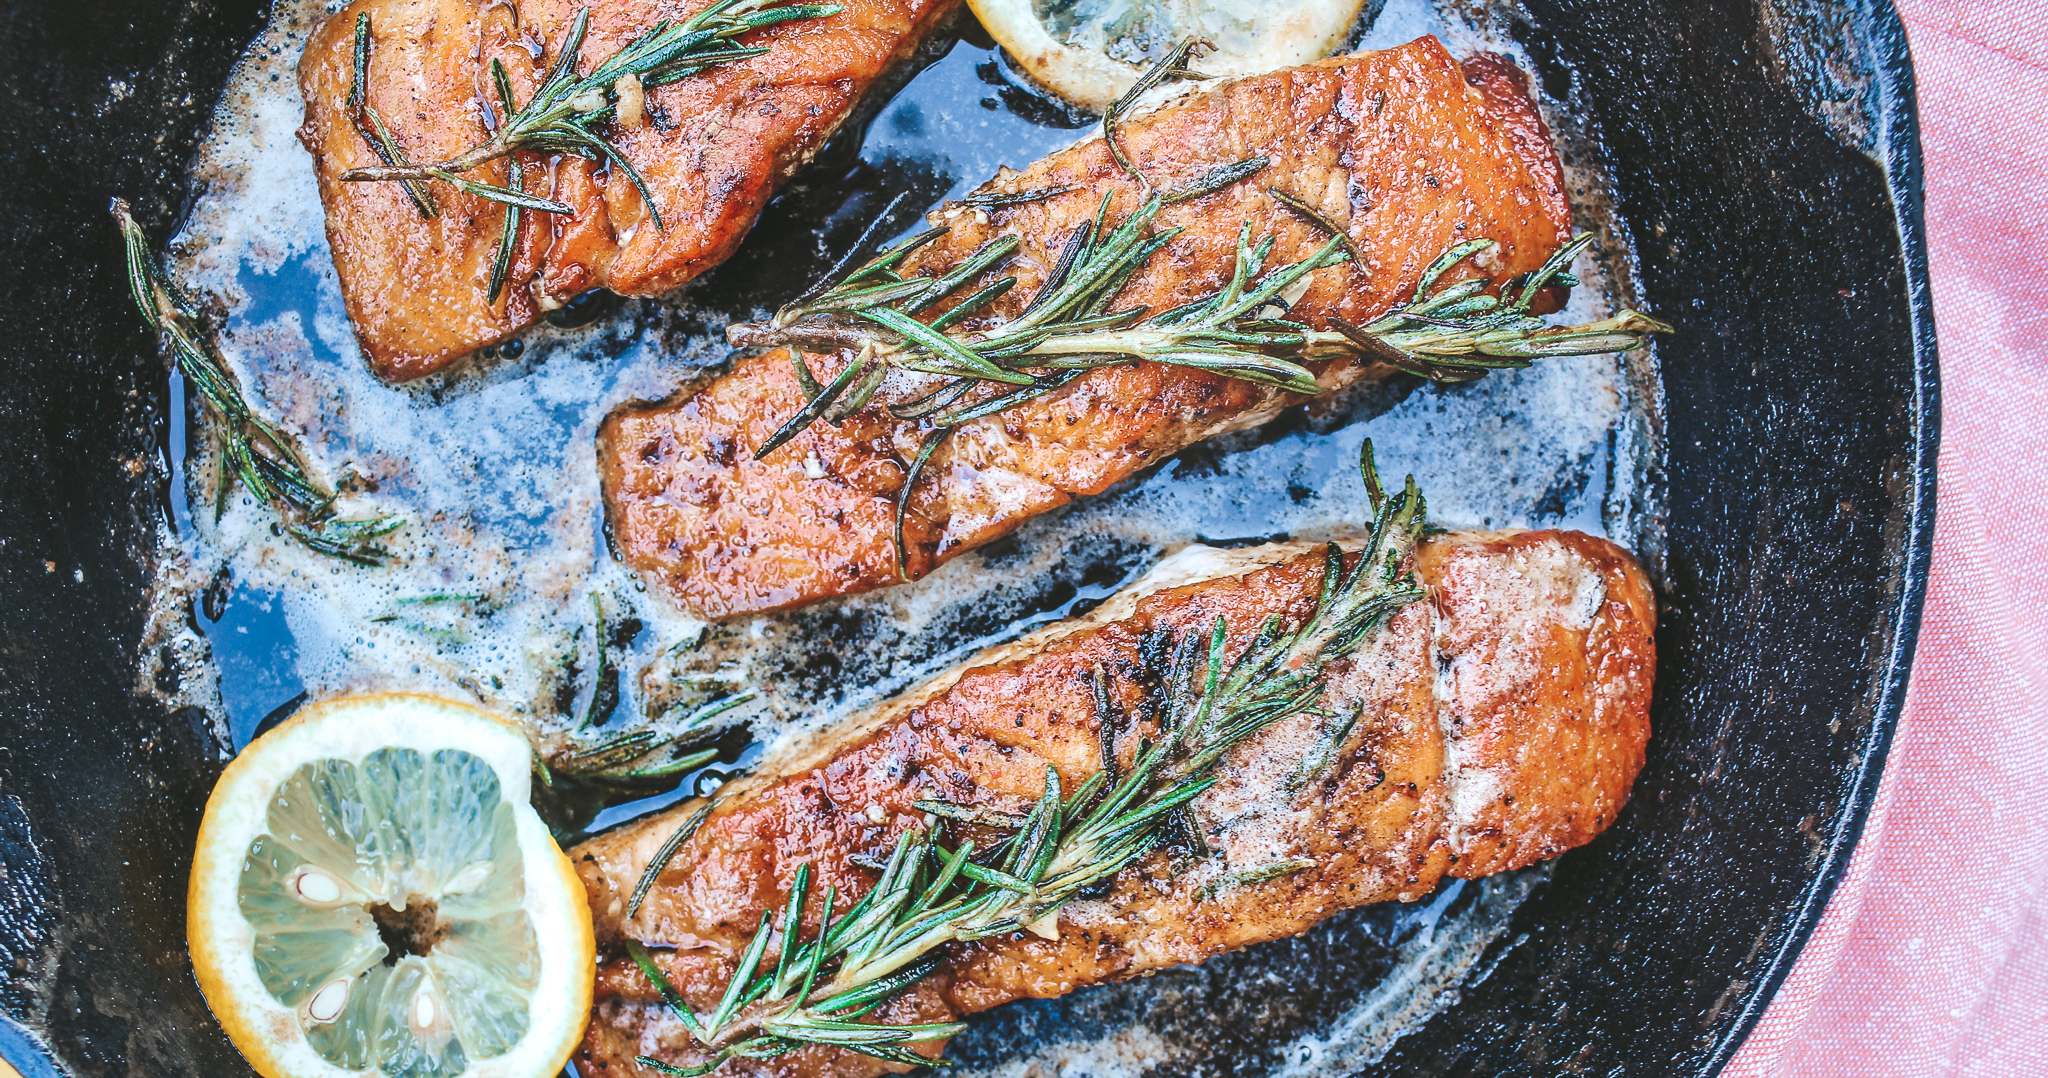 Seared Salmon with Rosemary and Lemon